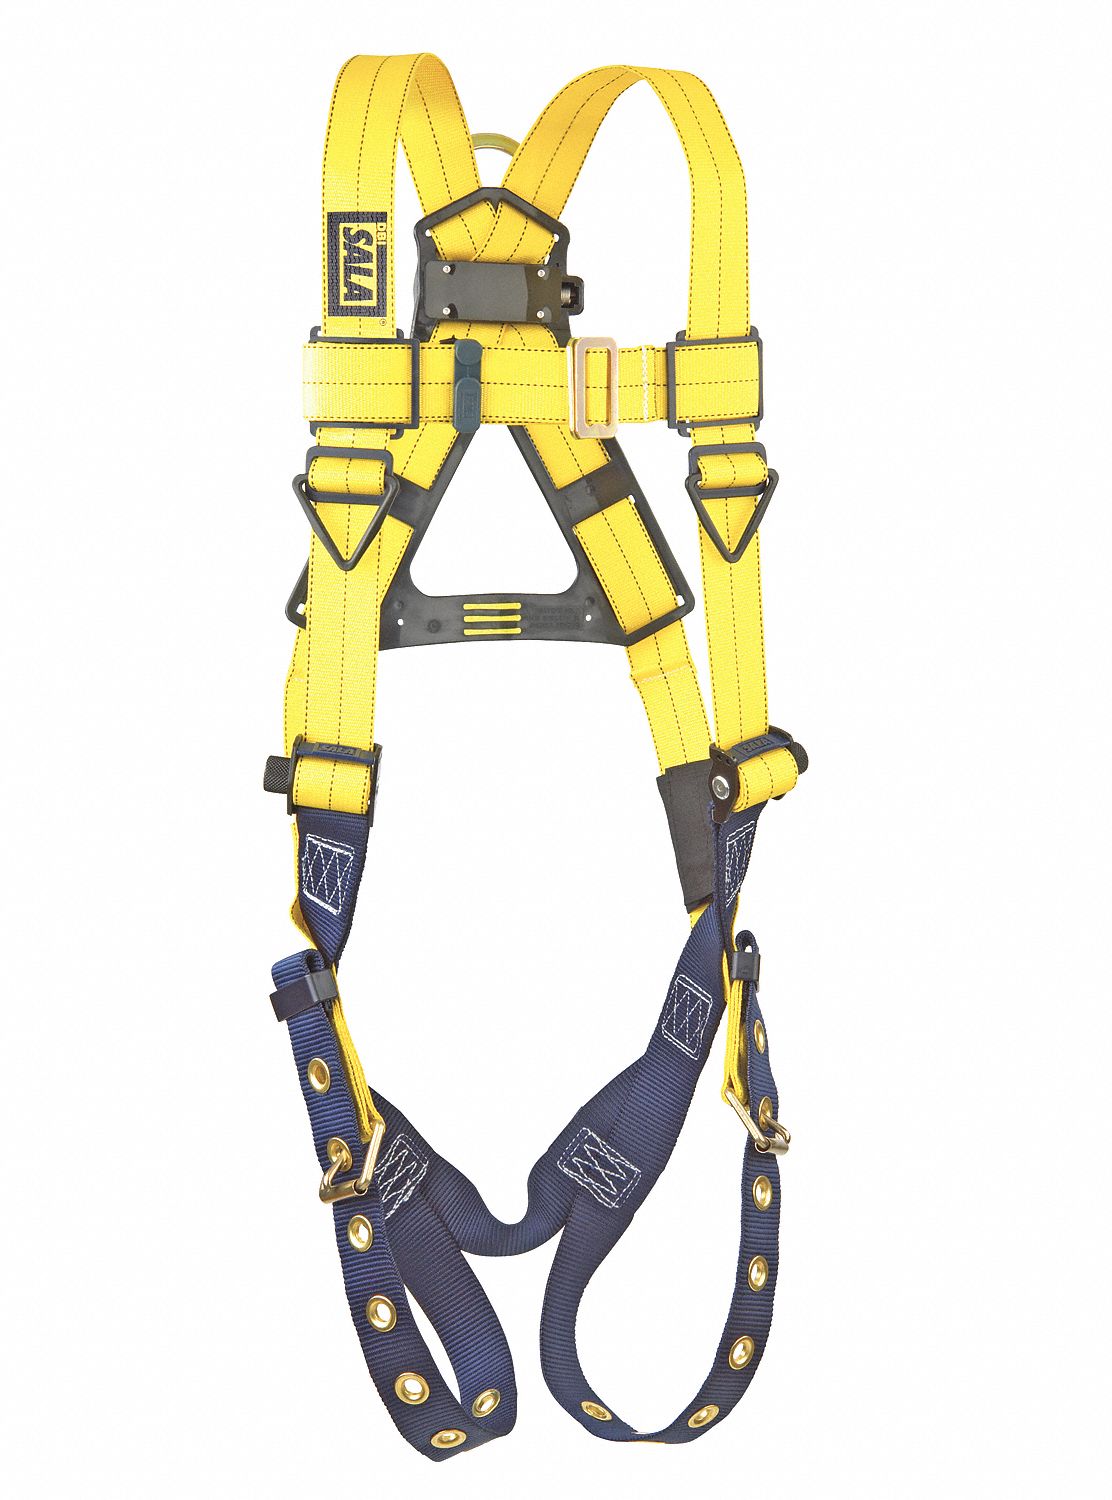 Extra Large DBI/Sala 1191261Pro Line Vest Style Full Body Harness with Comfort Padding Gold